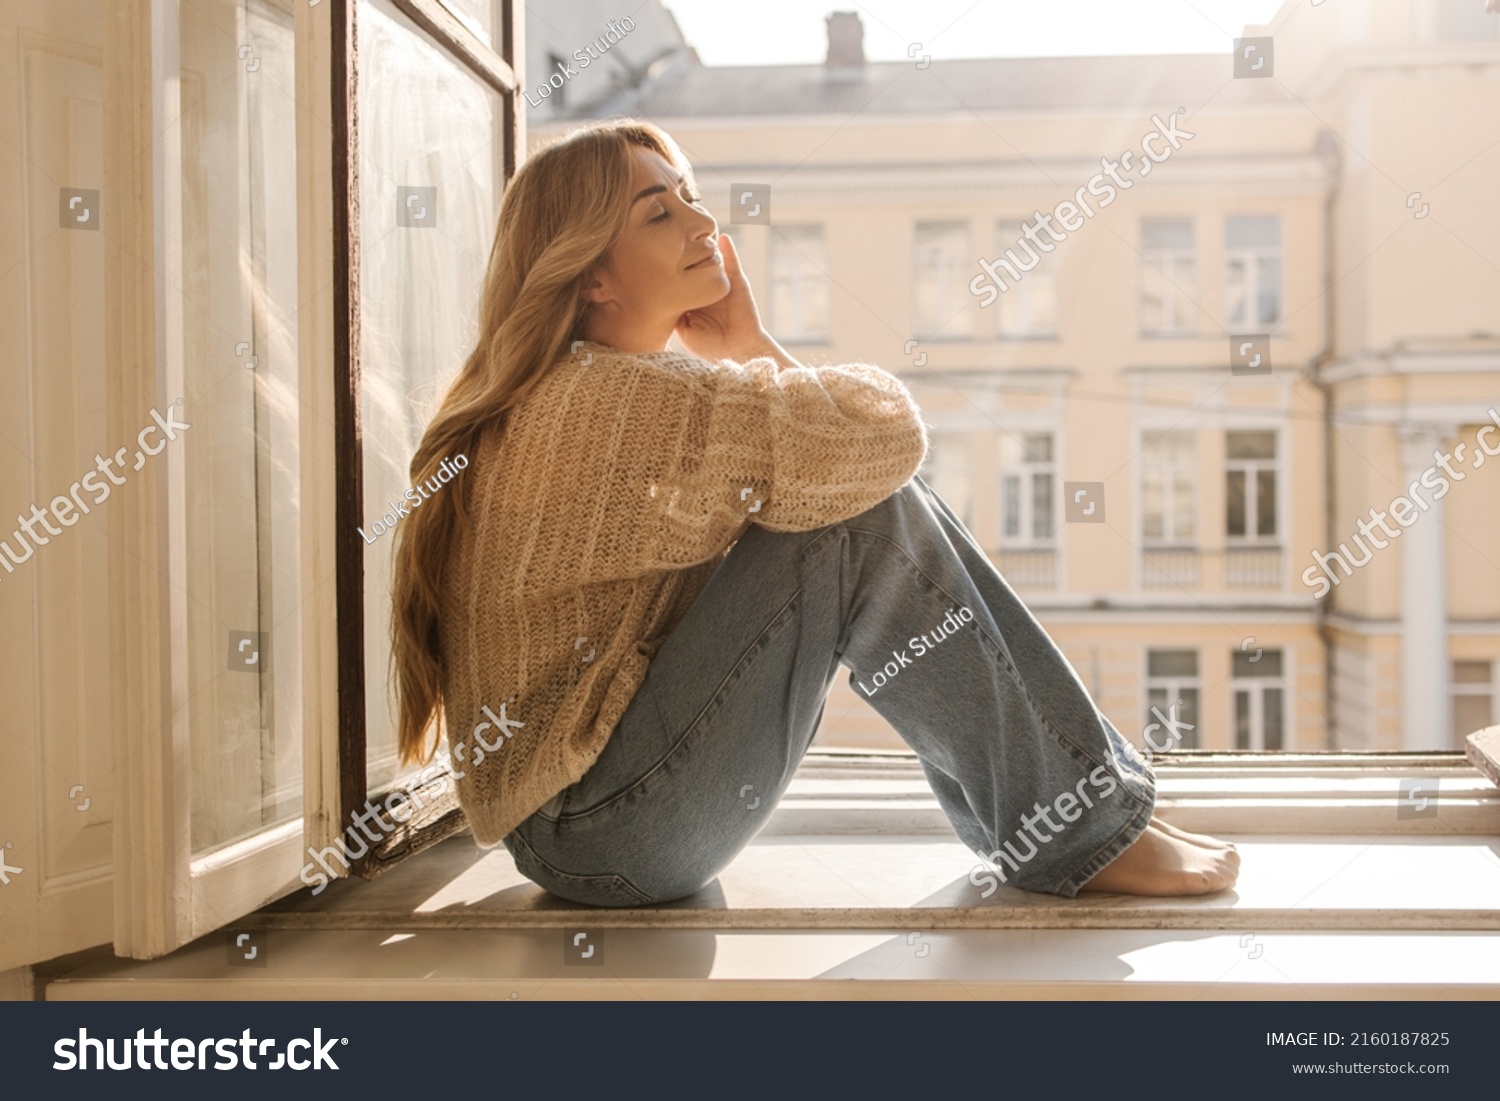 Cute caucasian adult lady with her eyes closed is basking in sun sitting on windowsill on warm day. Long-haired blonde wears casual clothes. Concept of enjoying moment #2160187825